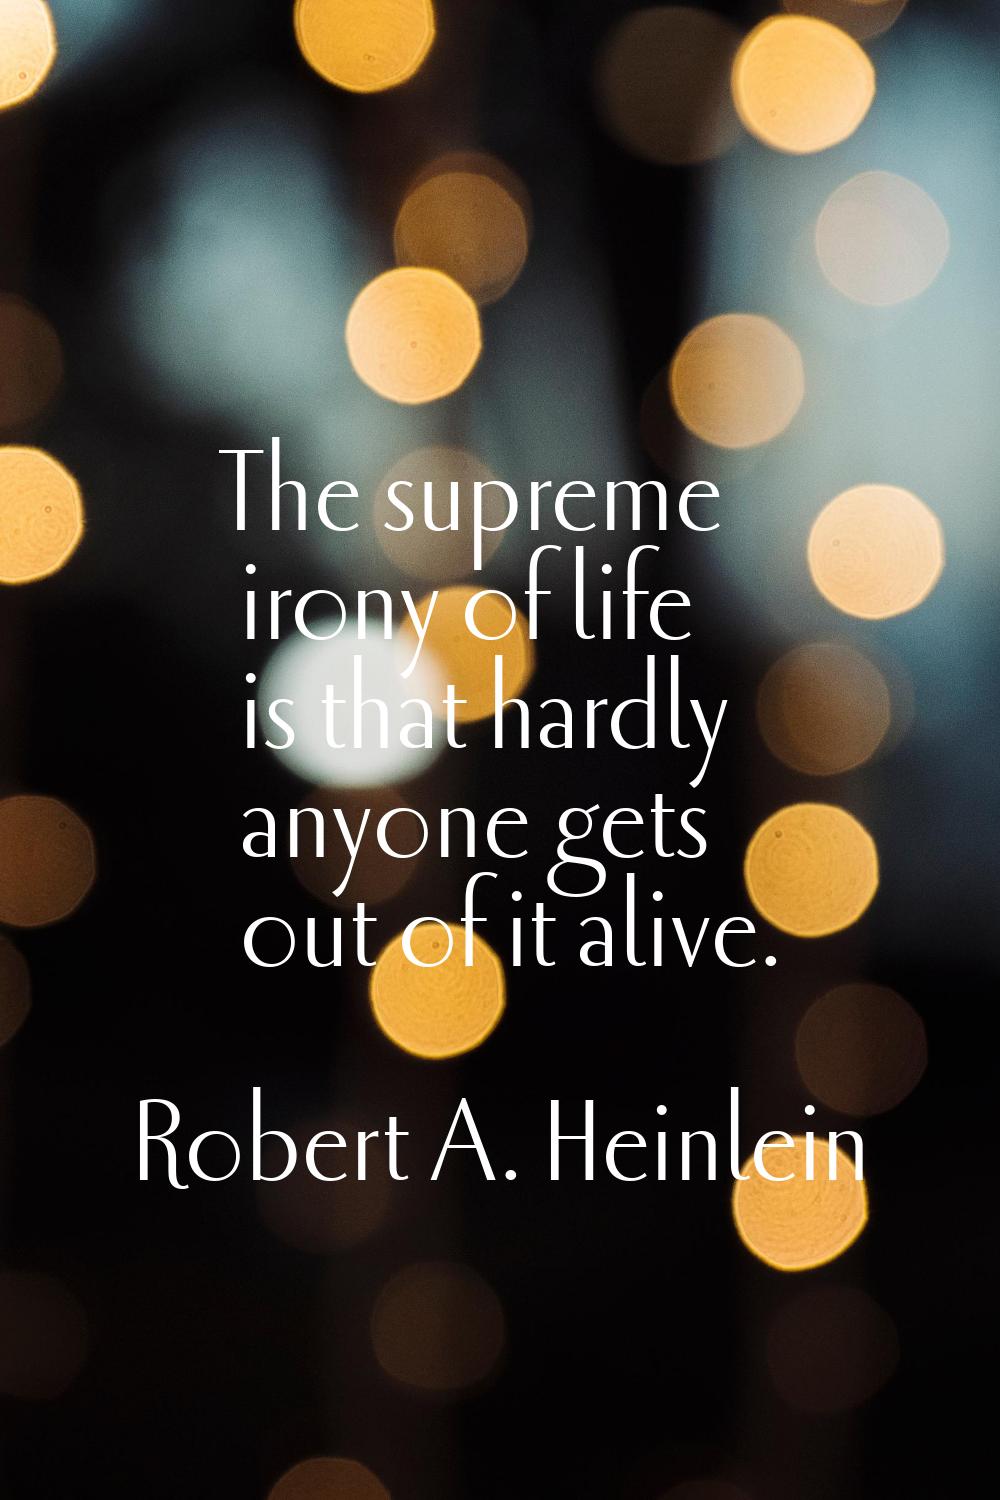 The supreme irony of life is that hardly anyone gets out of it alive.